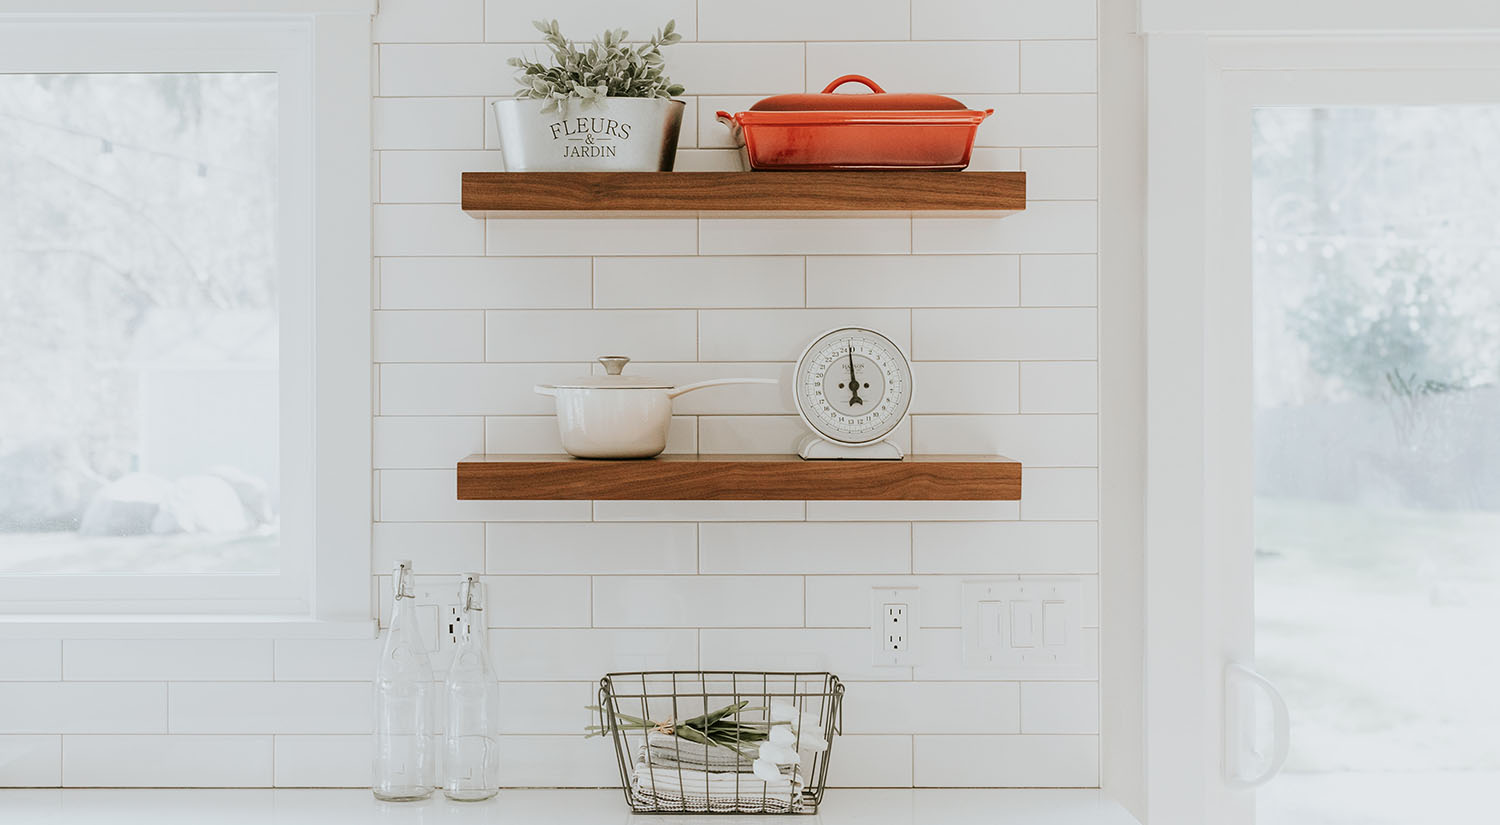 This photo of a white-tiled, spic-and-span kitchen represents a dream space for any ADHD individual. These ADHD hacks for adults can help you achieve this level of CLEAN!